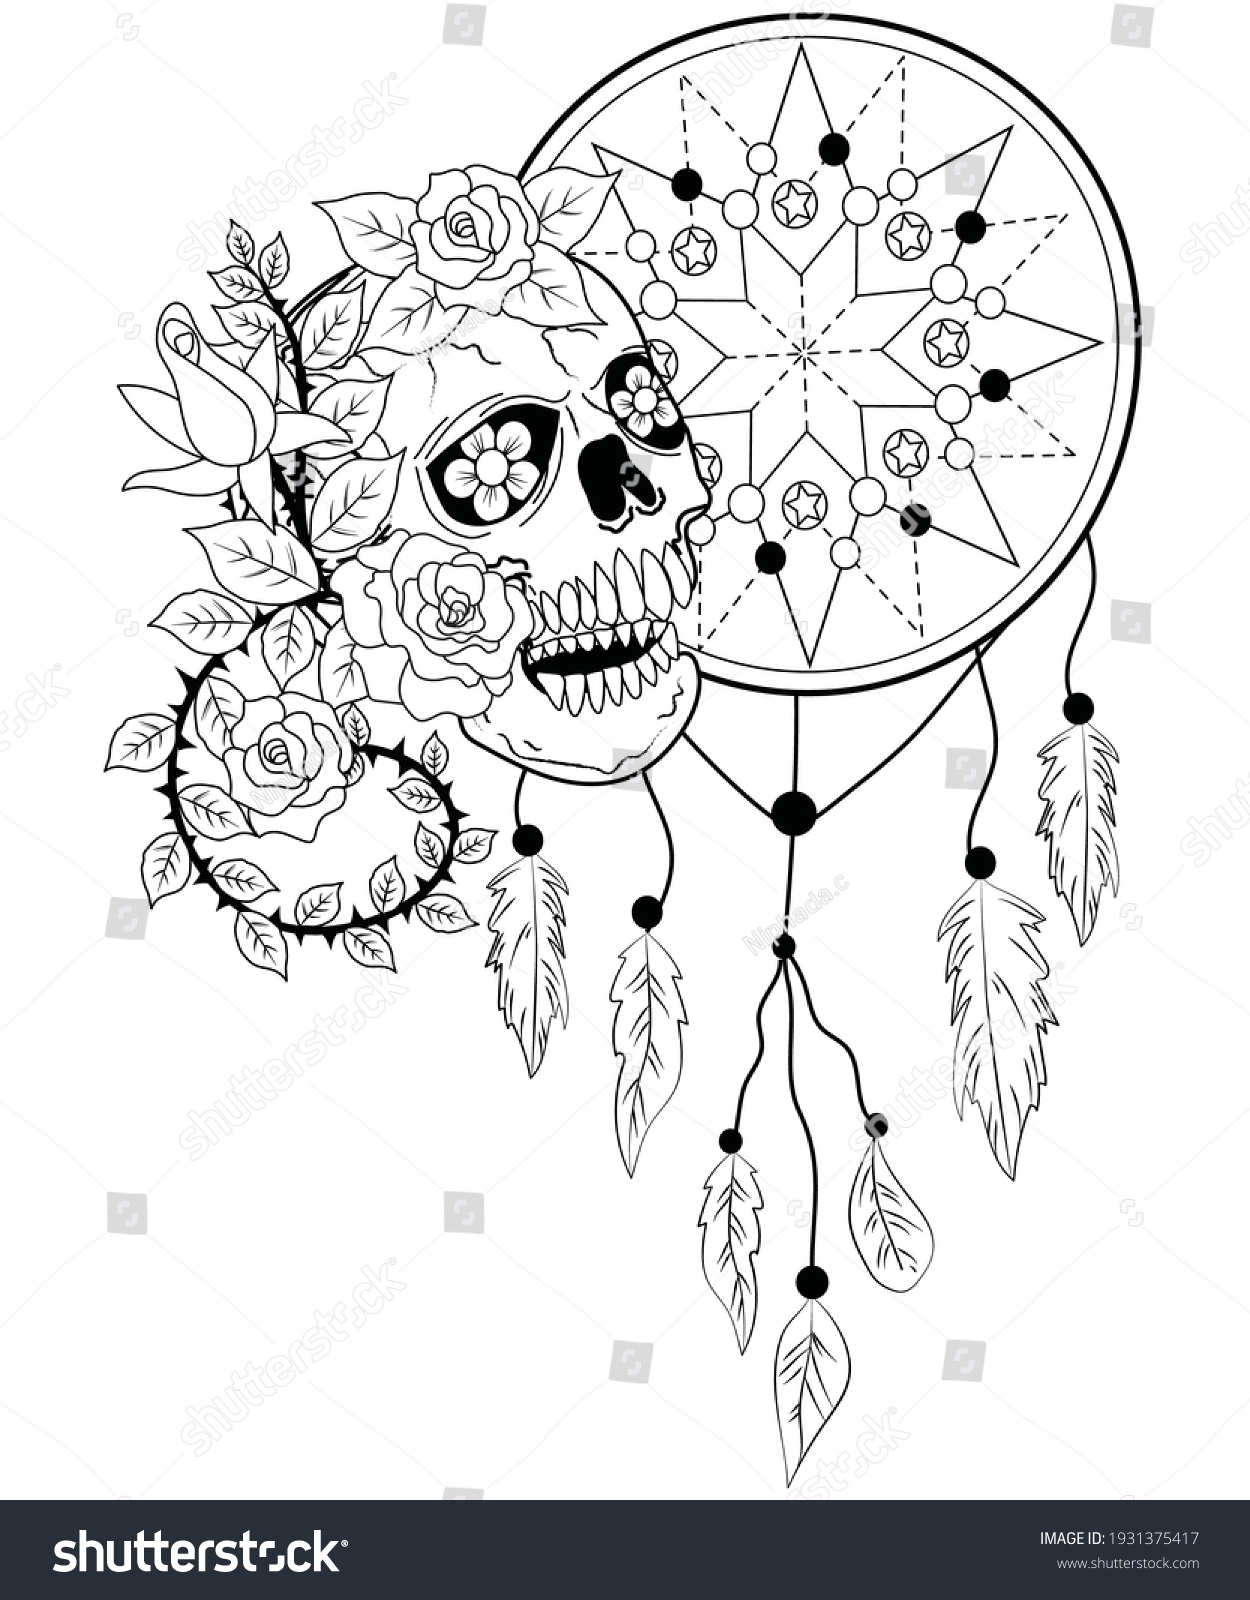 Adult skull coloring pages images stock photos d objects vectors